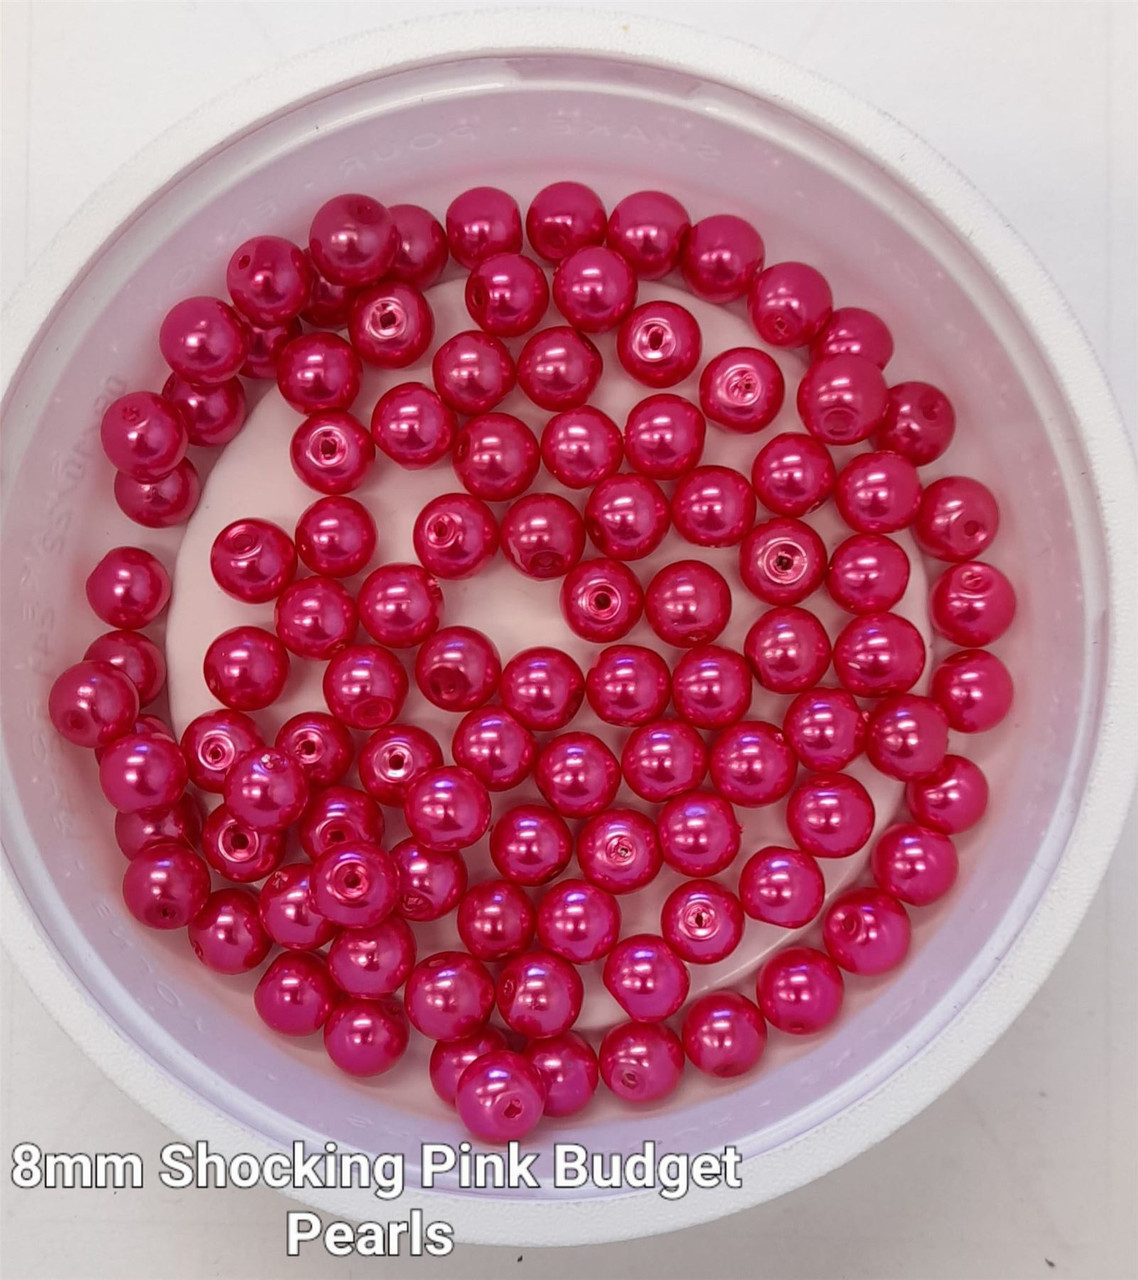 8mm budget Glass Pearls - Shocking Pink (100 beads)